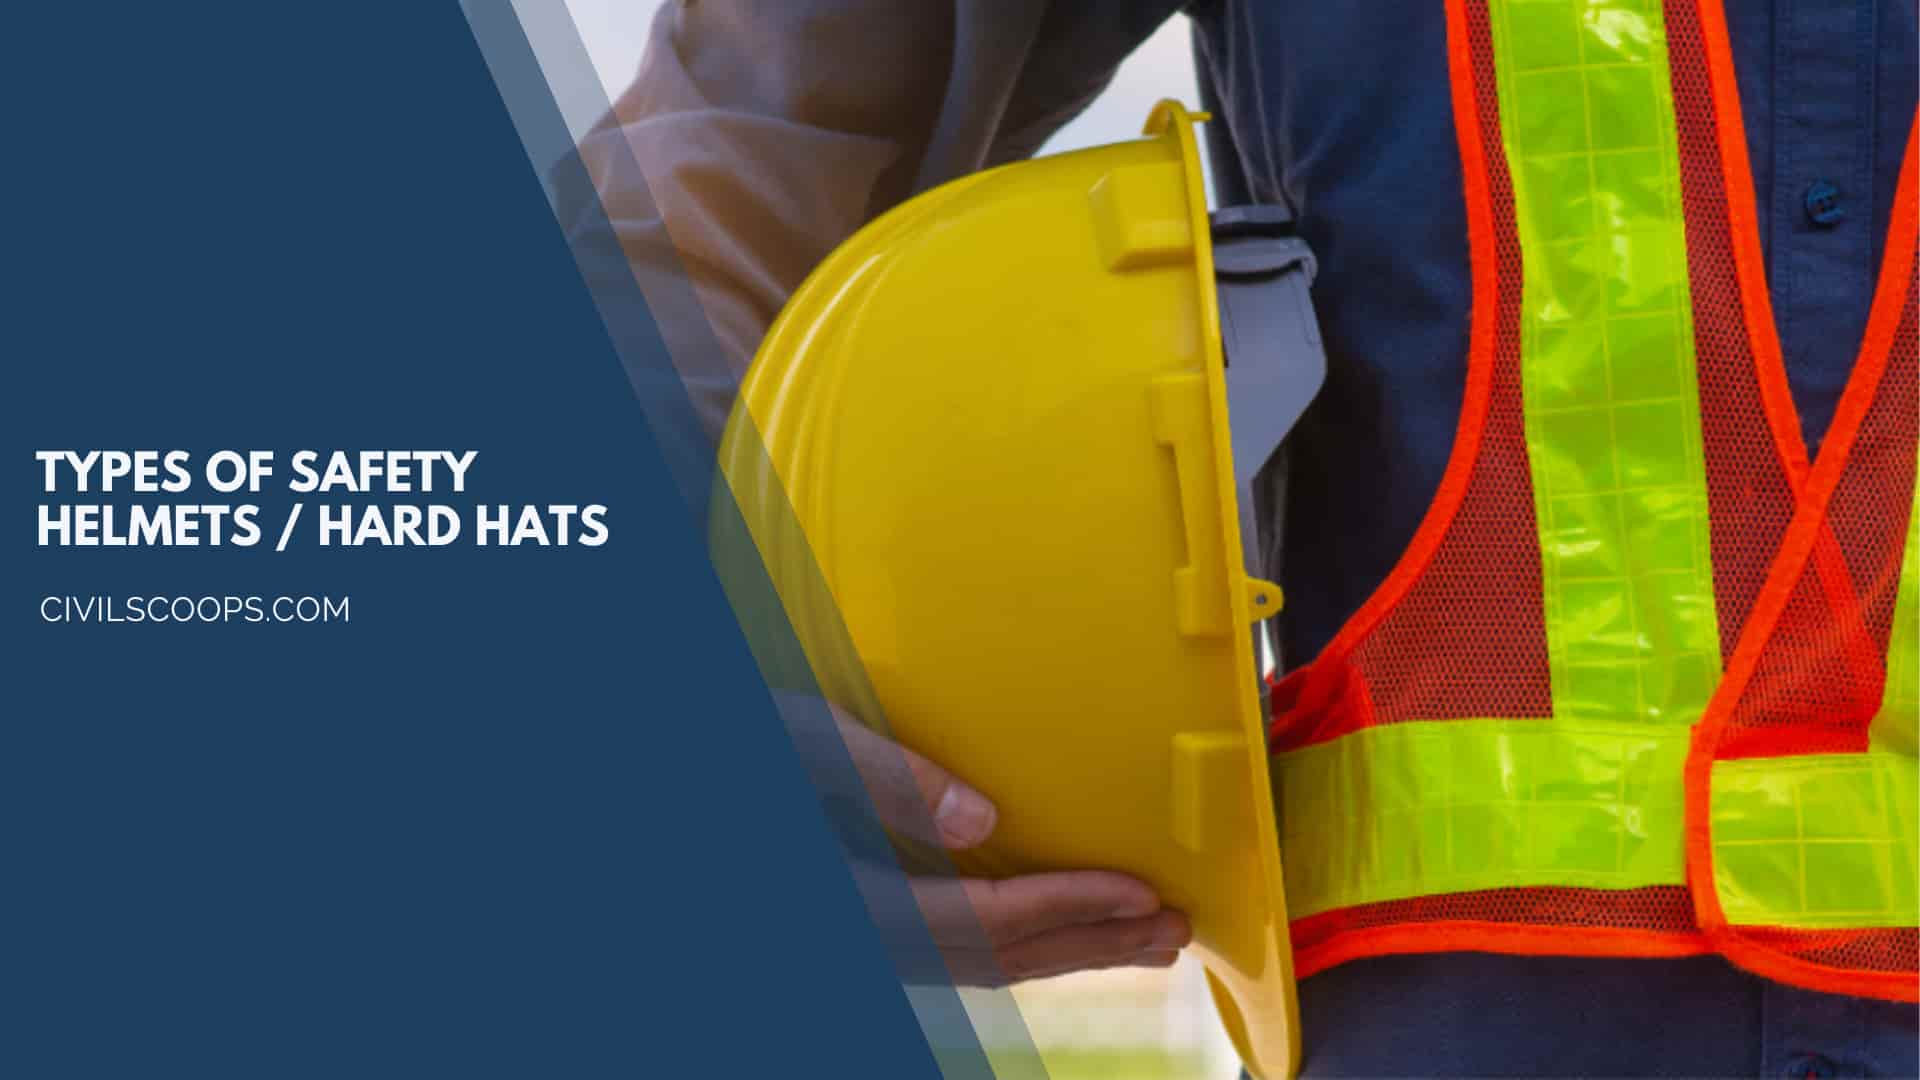 Types of Safety Helmets / Hard Hats